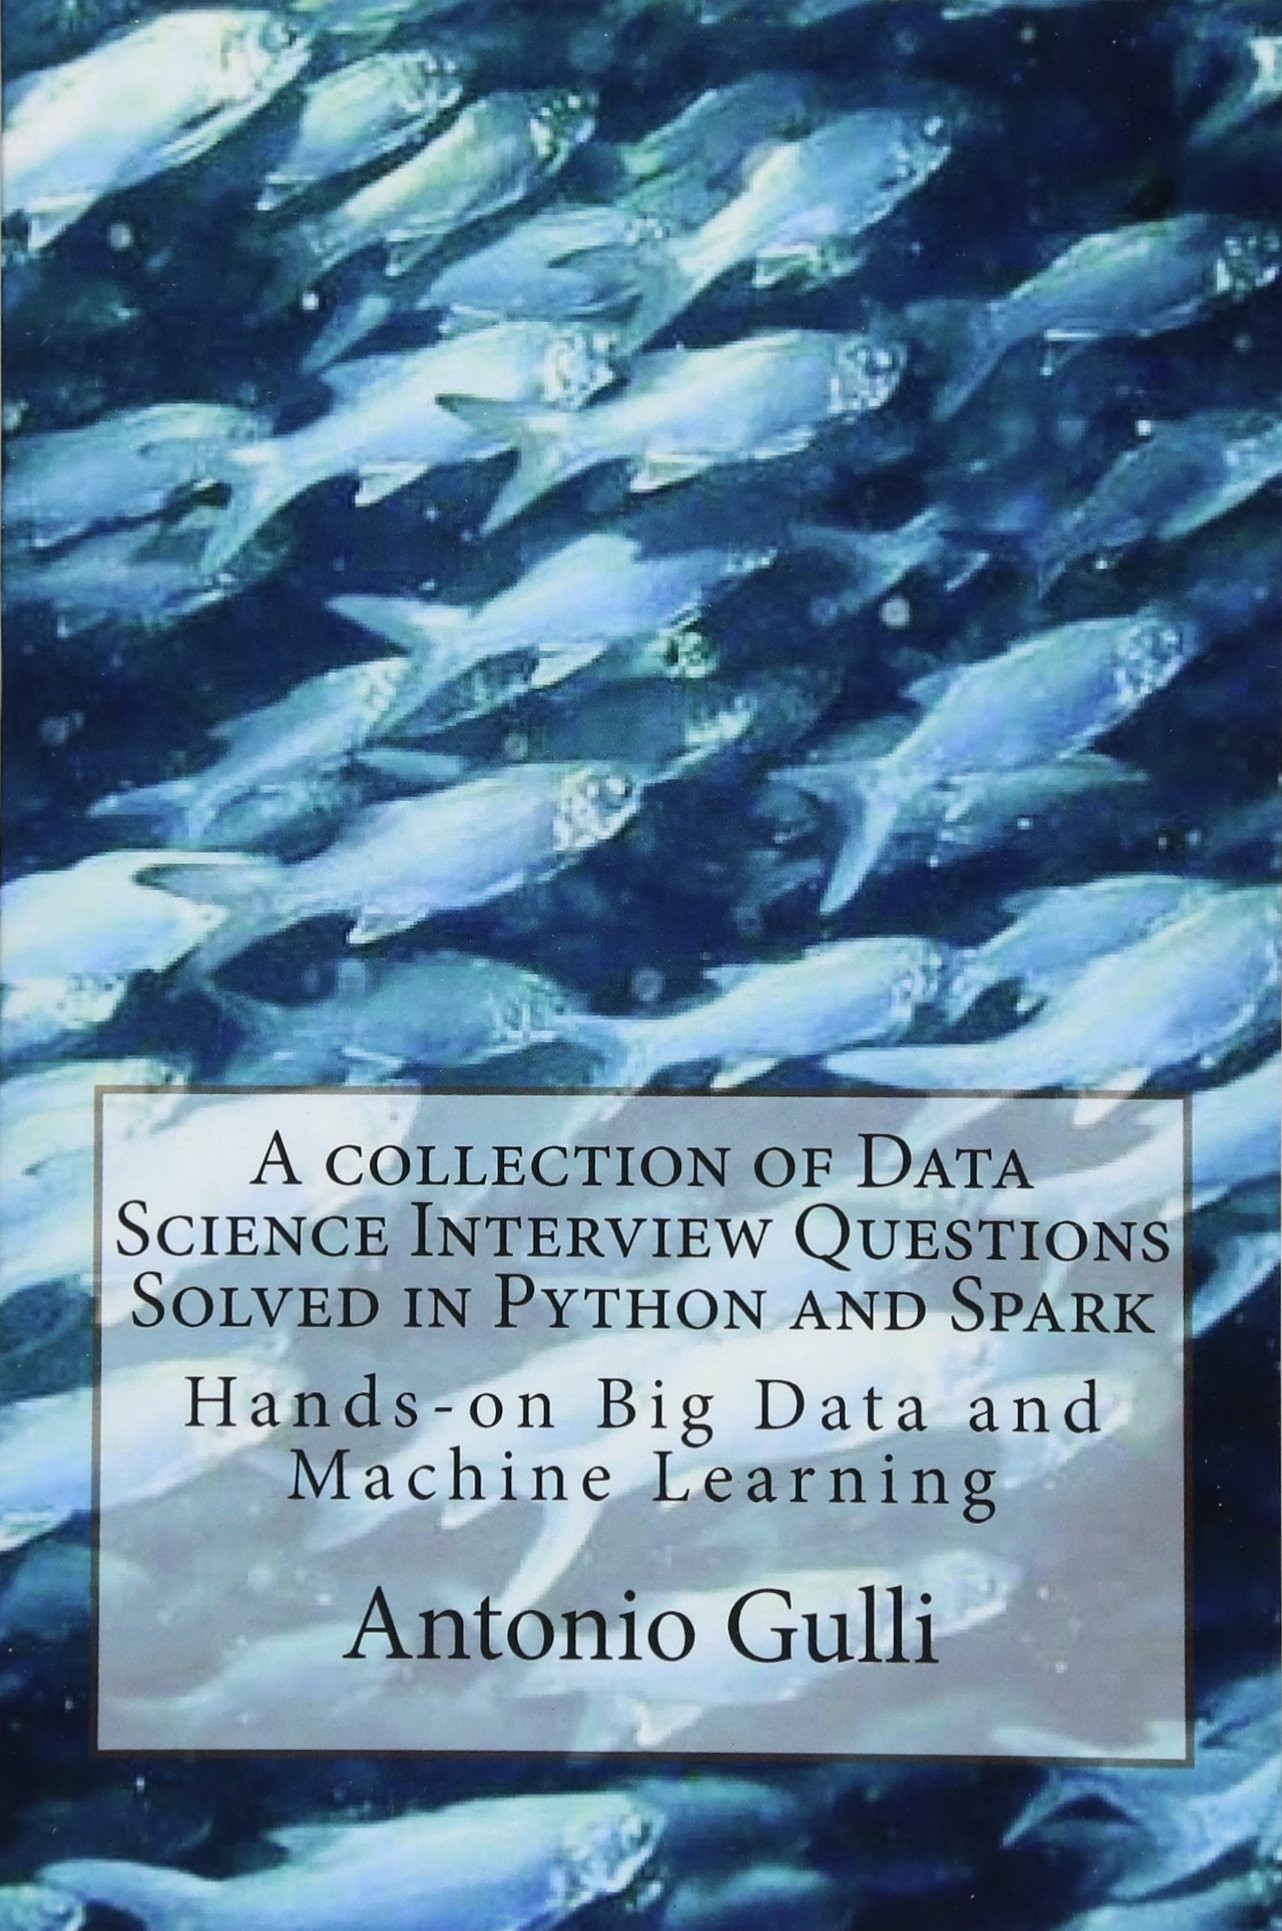 A Collection of Data Science Interview Questions Solved in Python and Spark: Hands-On Big Data and Machine Learning